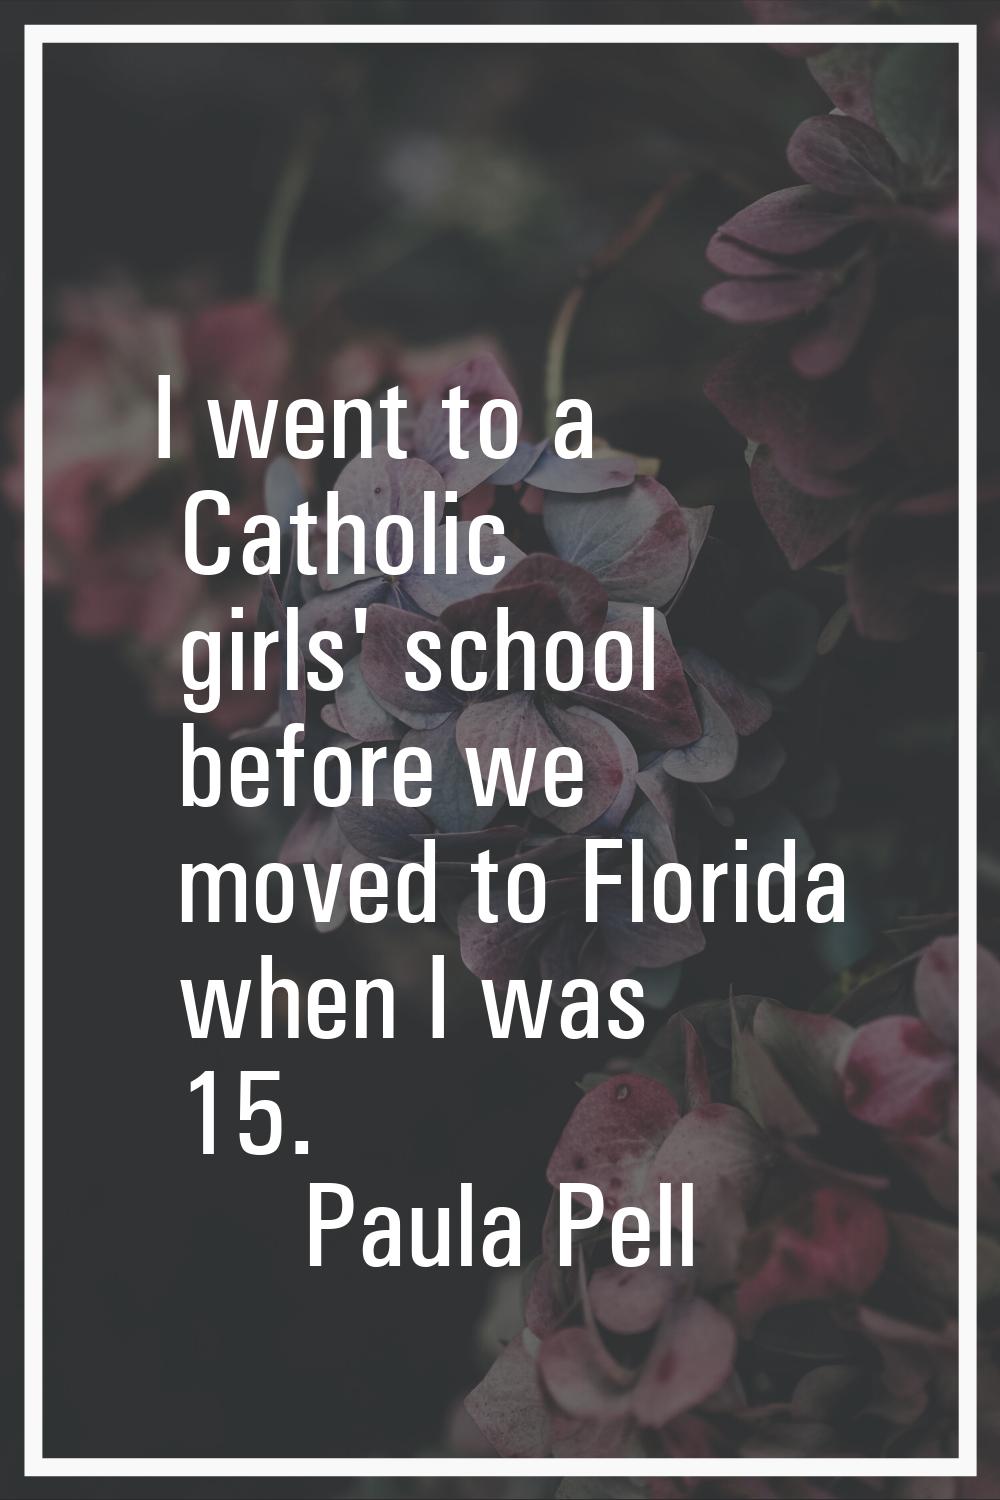 I went to a Catholic girls' school before we moved to Florida when I was 15.